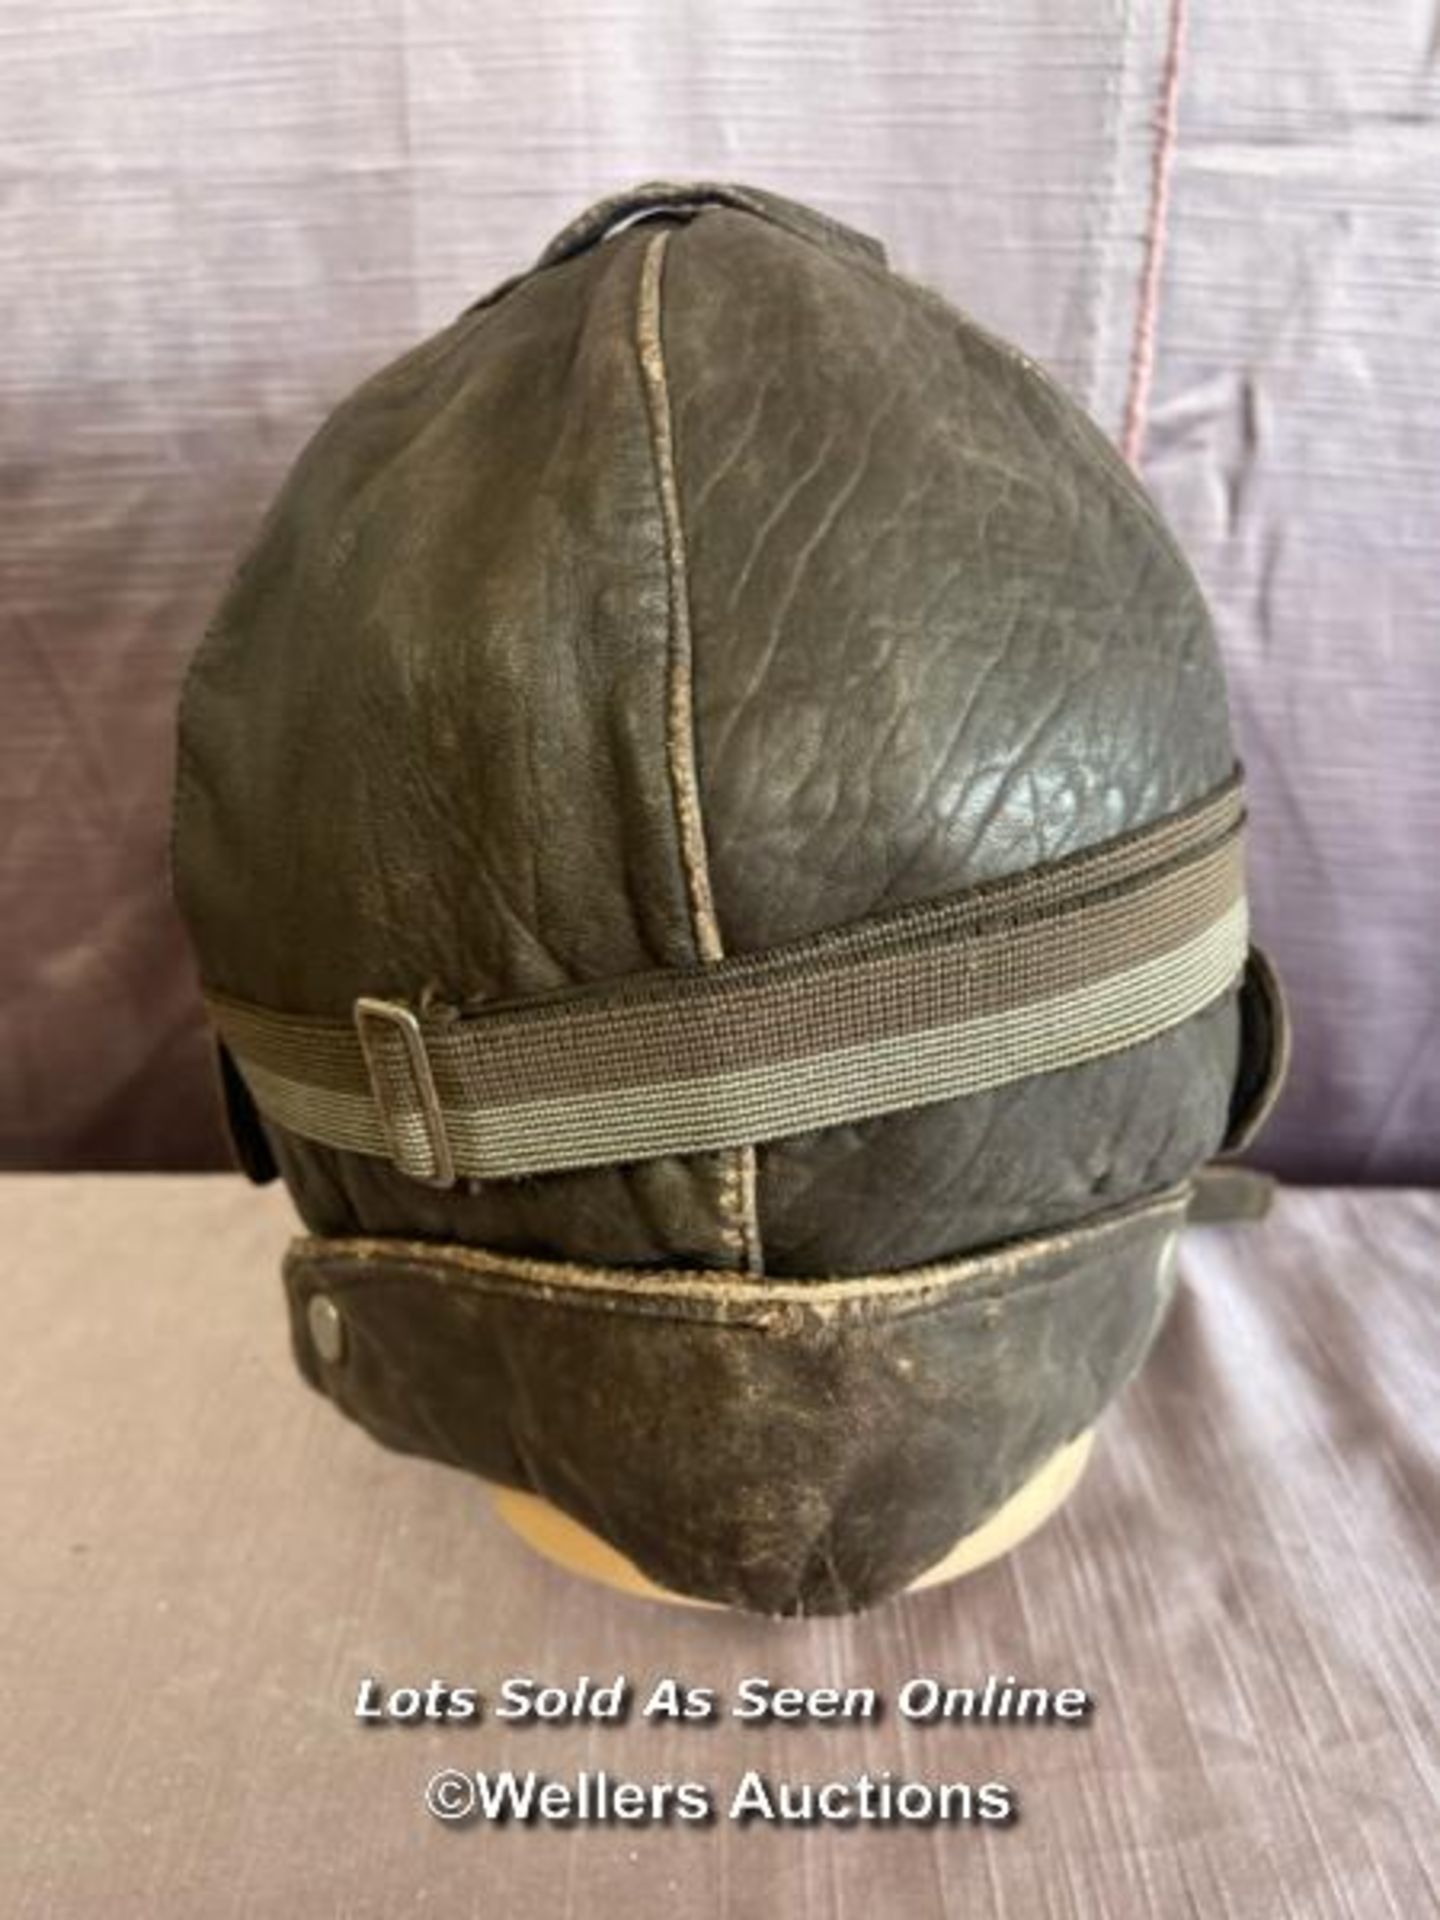 PRE WAR LEATHER FLYING OR DRIVING HELMET WITH ASSOCIATED GOGGLES - Image 3 of 4